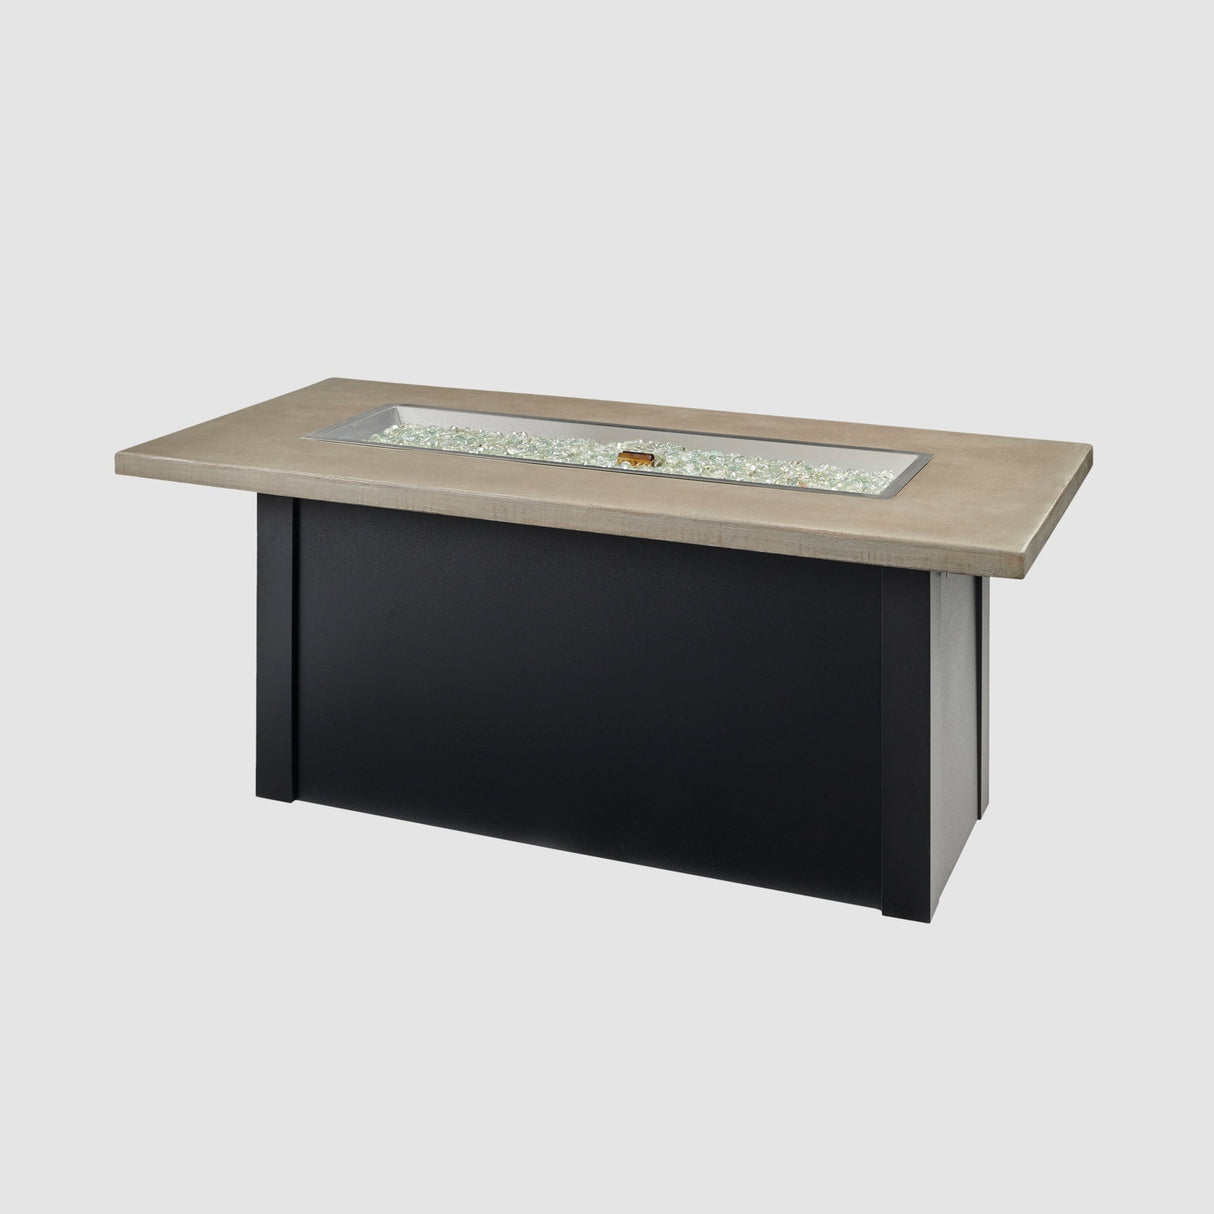 Fire gems placed in the burner of a Havenwood Linear Gas Fire Pit Table with a Pebble Grey top and Luverne Black base